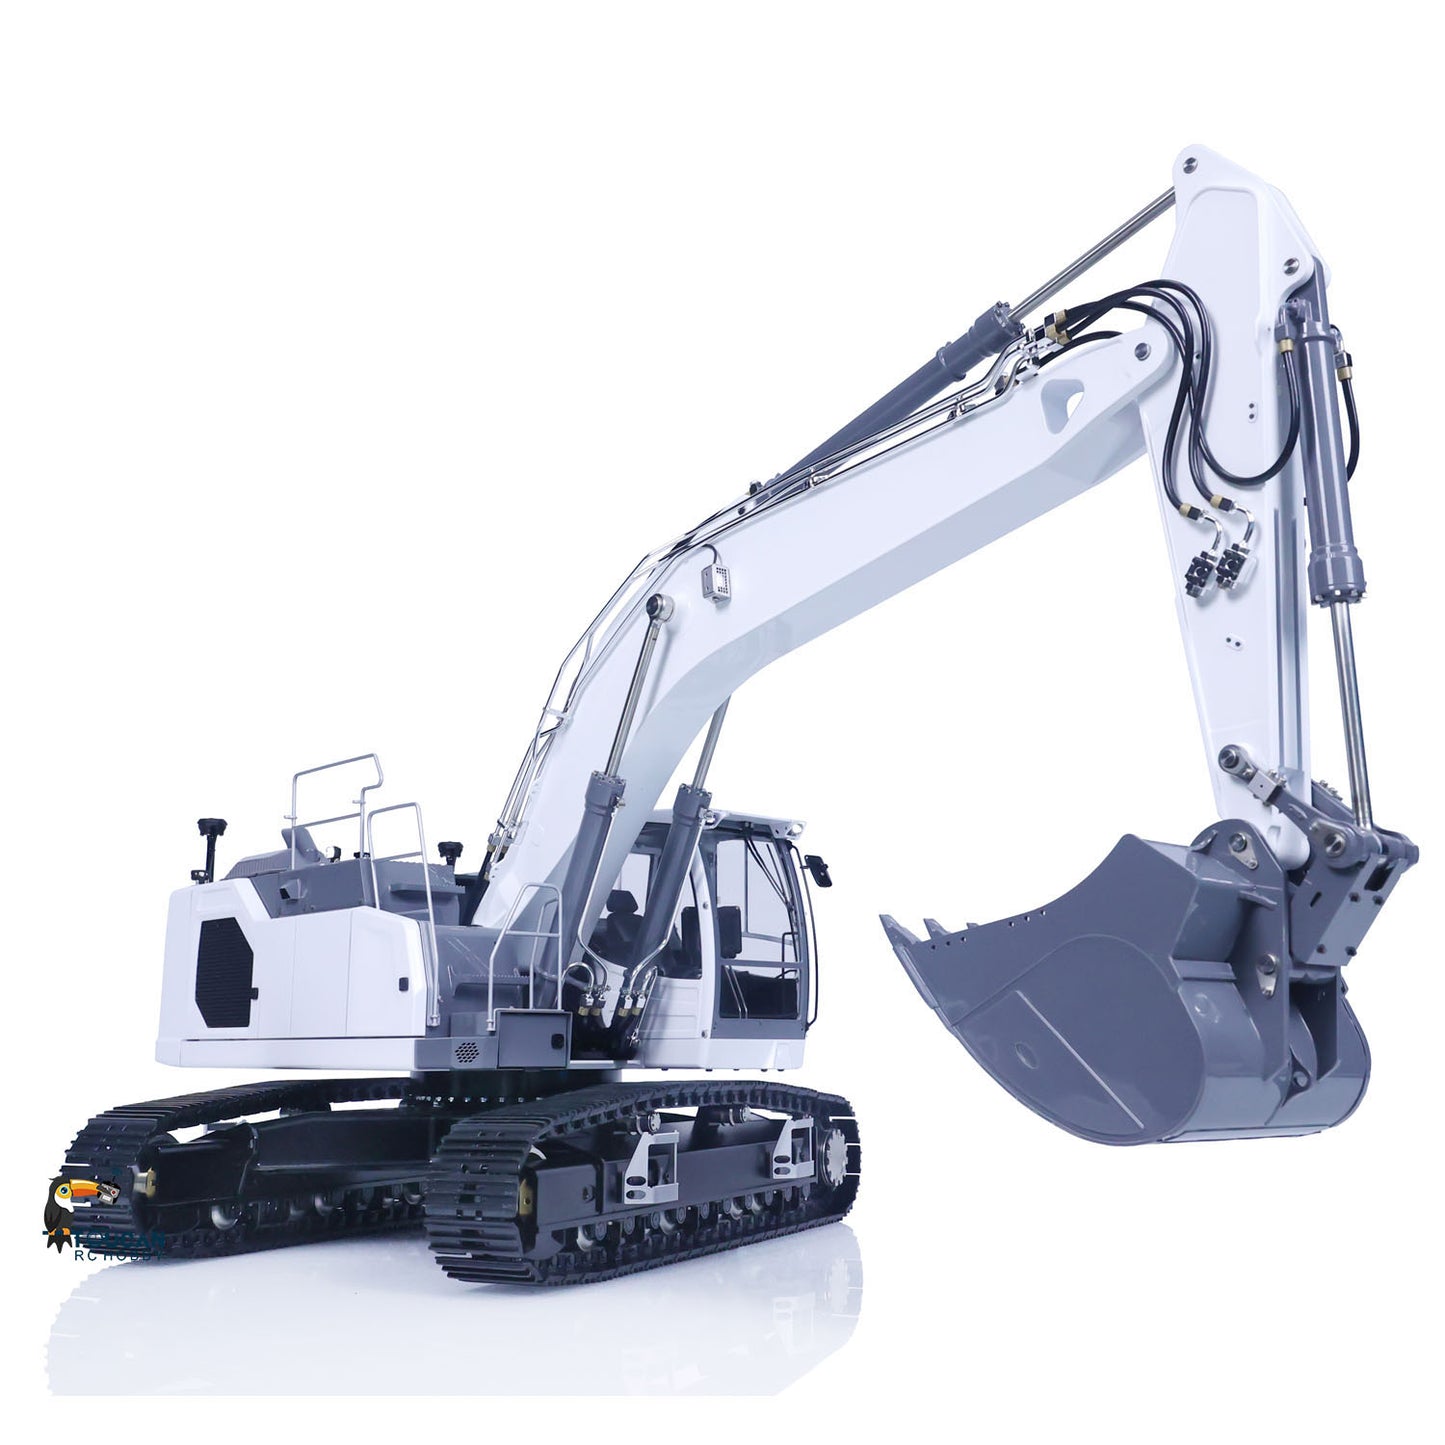 IN STOCK 1/14 Scale LESU 945 Metal Hydraulic RC Digger LESU Aoue-LR945 Wireless Radio Control Excavator Assembled Painted Lights System 7CH Valve